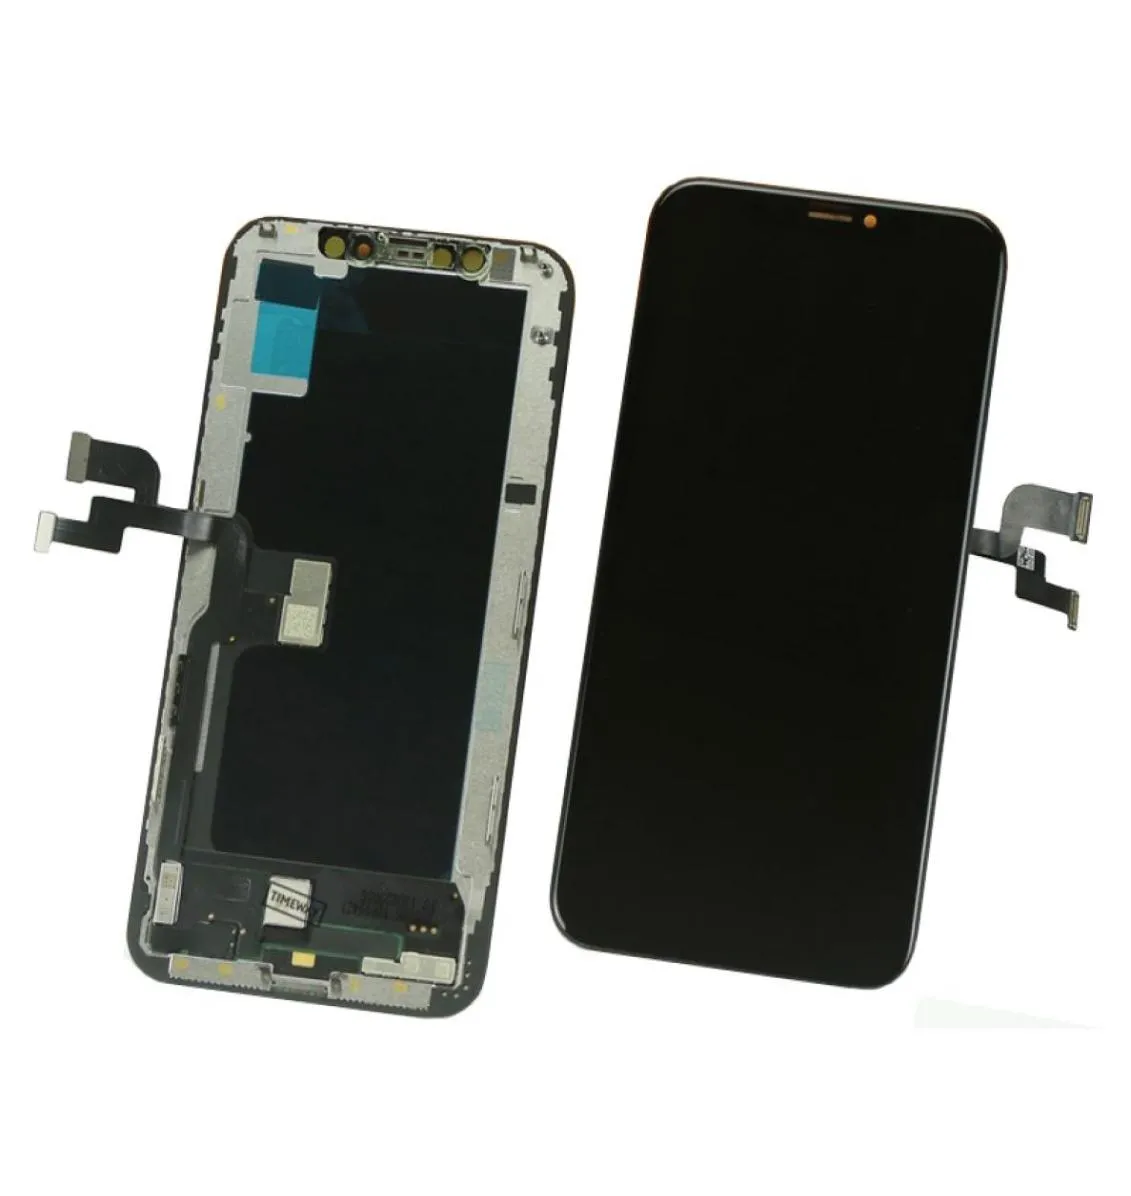 OLED LCD Panel Display For iPhone X Xs XsMax Touch Screen Digitizer Assembly Replacement Factory 100 Strictly Tesed No Dea8467372